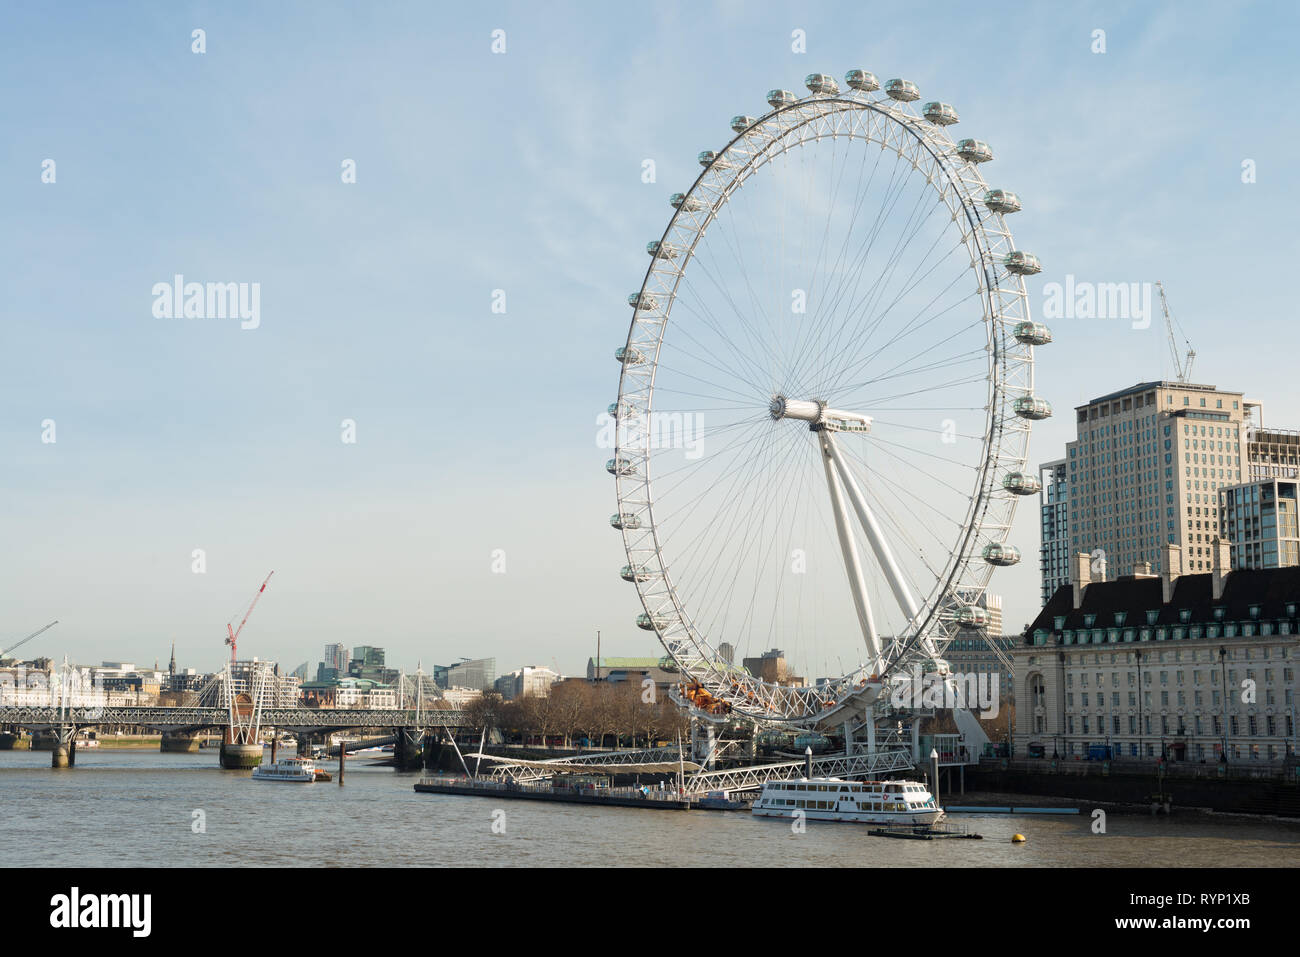 The London Eye tourist attraction on the banks of the River Thames, London, England, UK Stock Photo